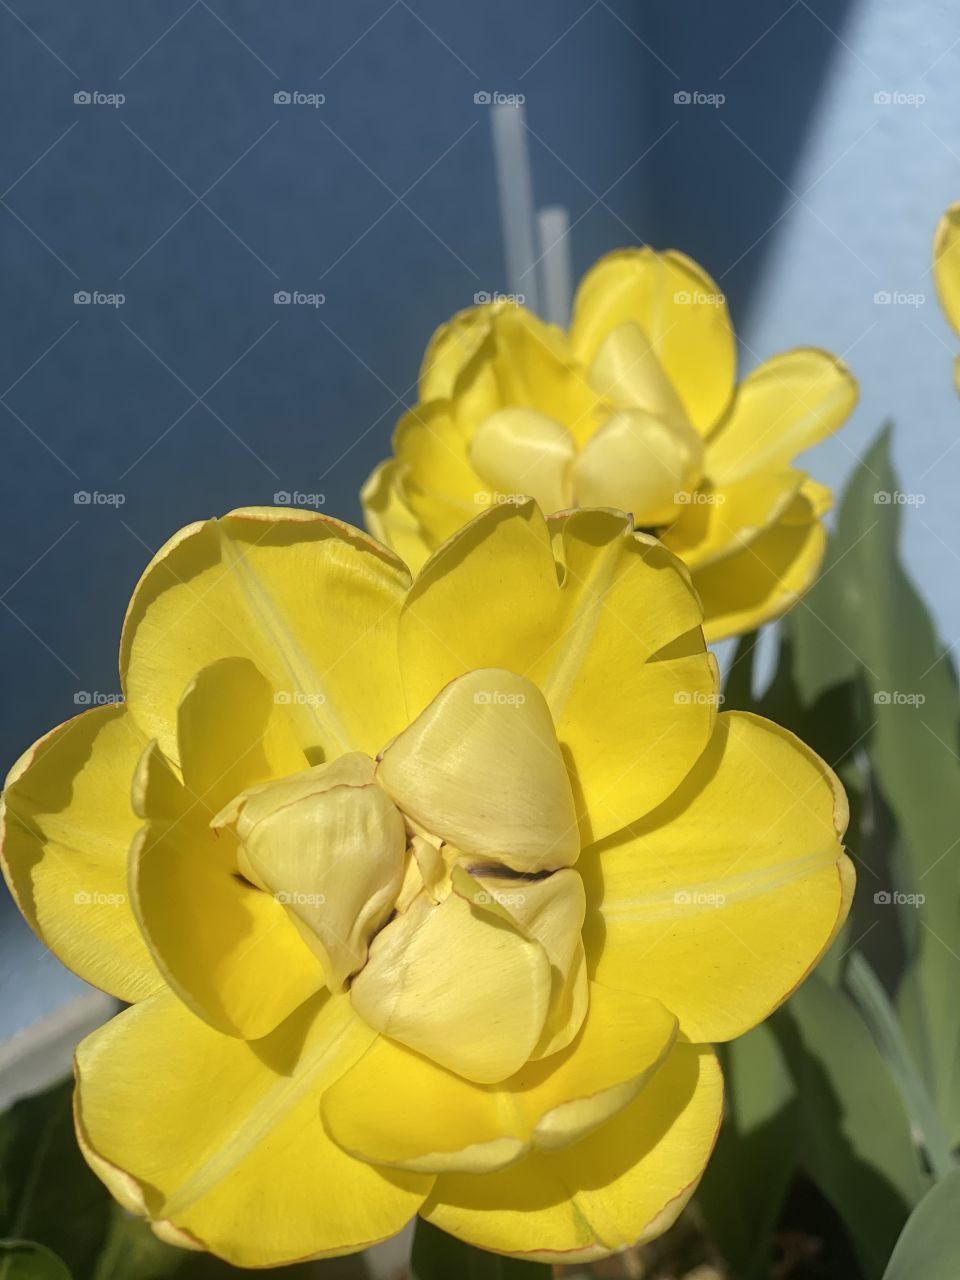 spring flowers, holiday flowers, flowers as a gift, colorful flowers, roses, daffodils, yellow flowers, shop flowers, fresh flowers, nature, flowers in a pot, flowers grow